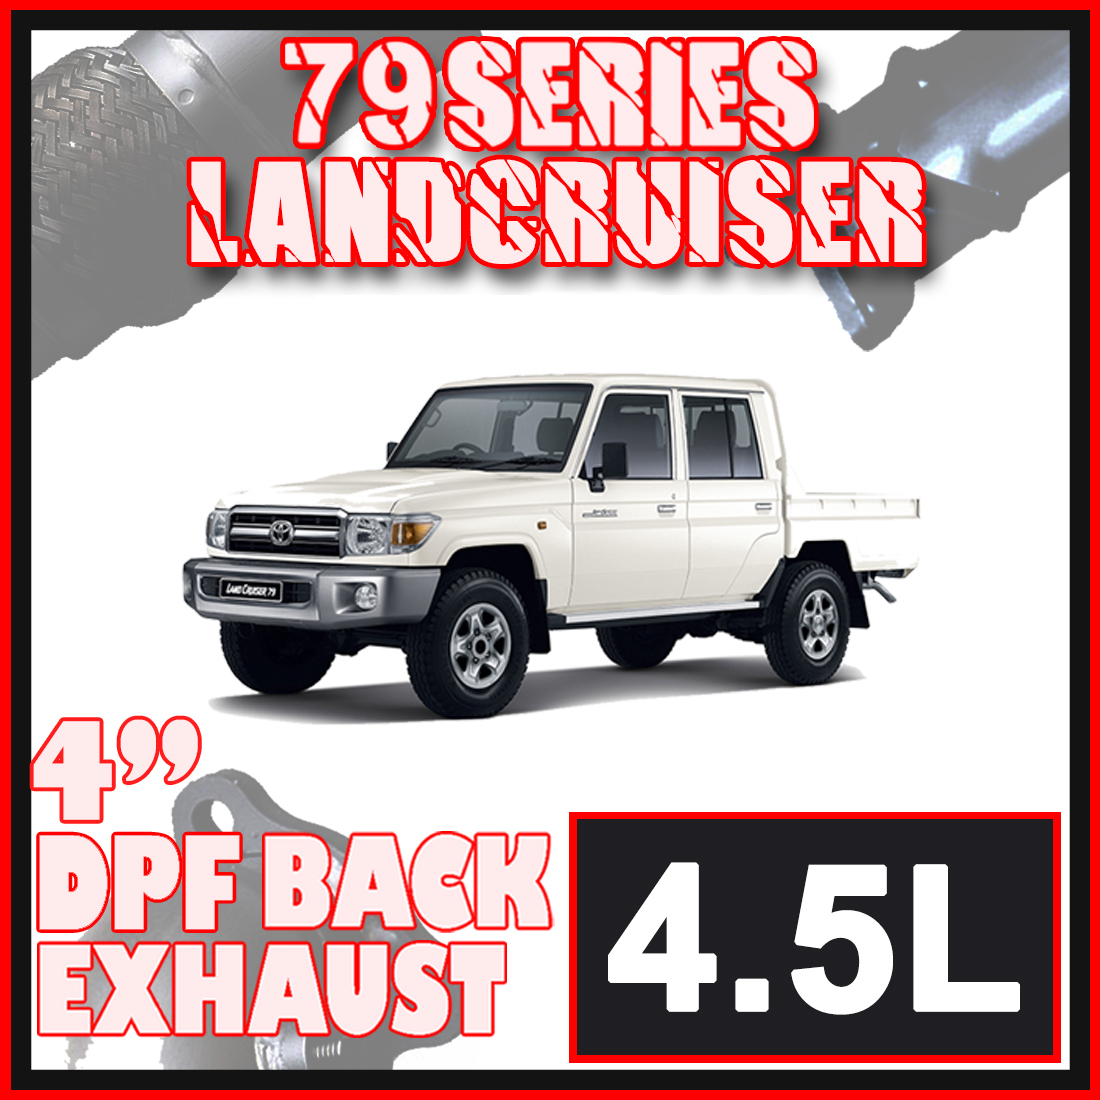 Toyota Landcruiser Exhaust 79 Series 4" DPF Back System image